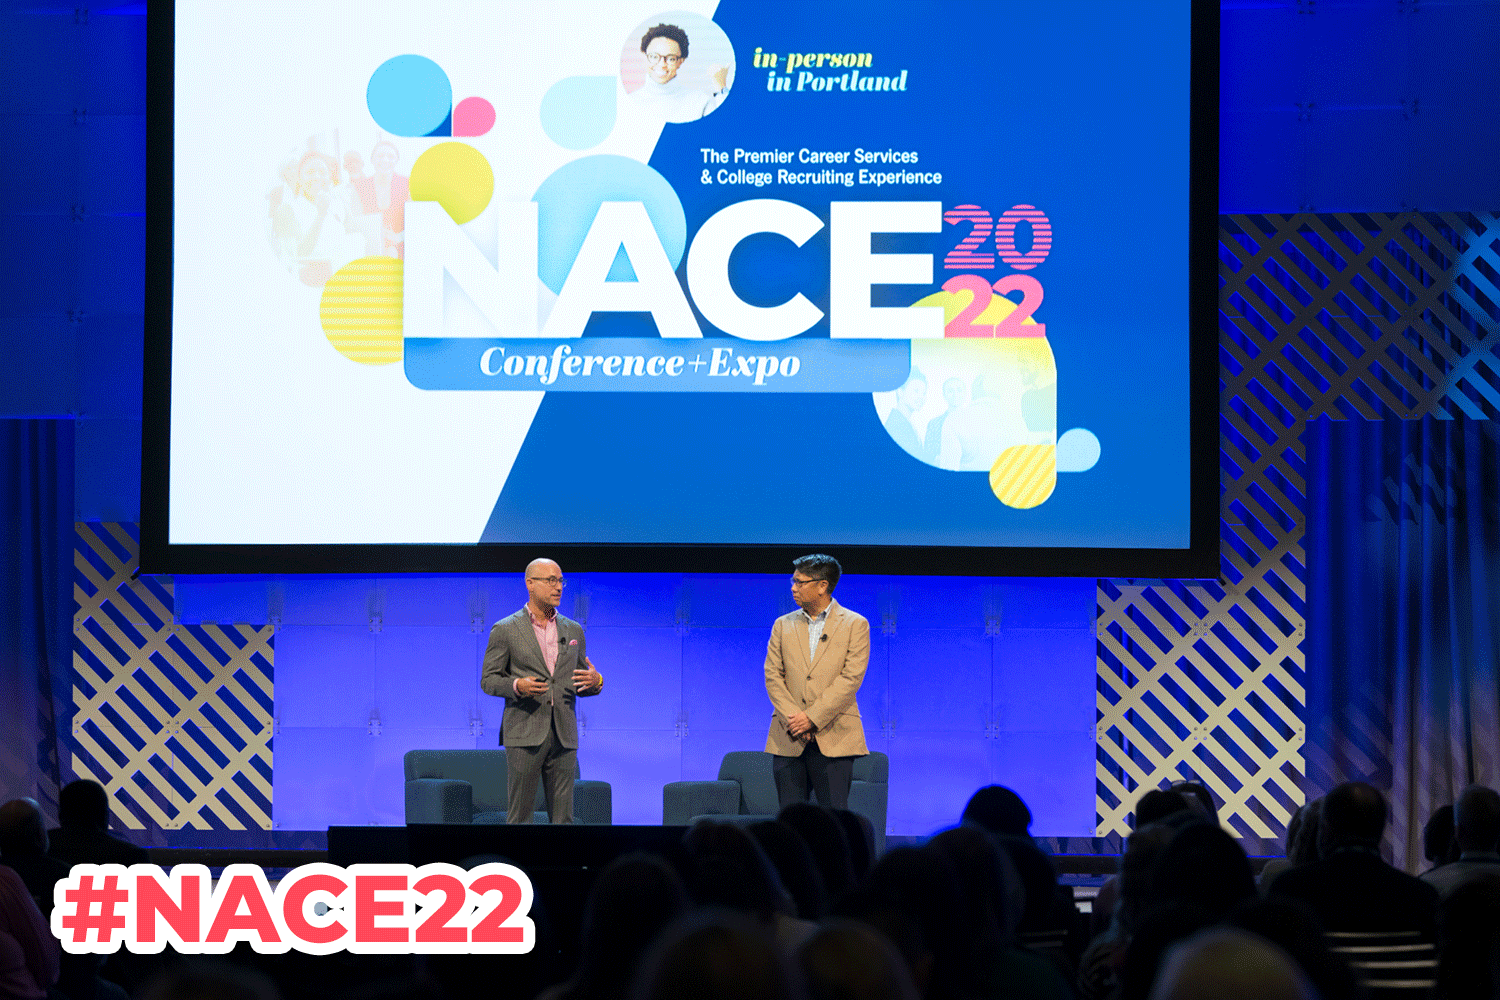 2022 NACE Conference & Expo The Premier Career Services & College